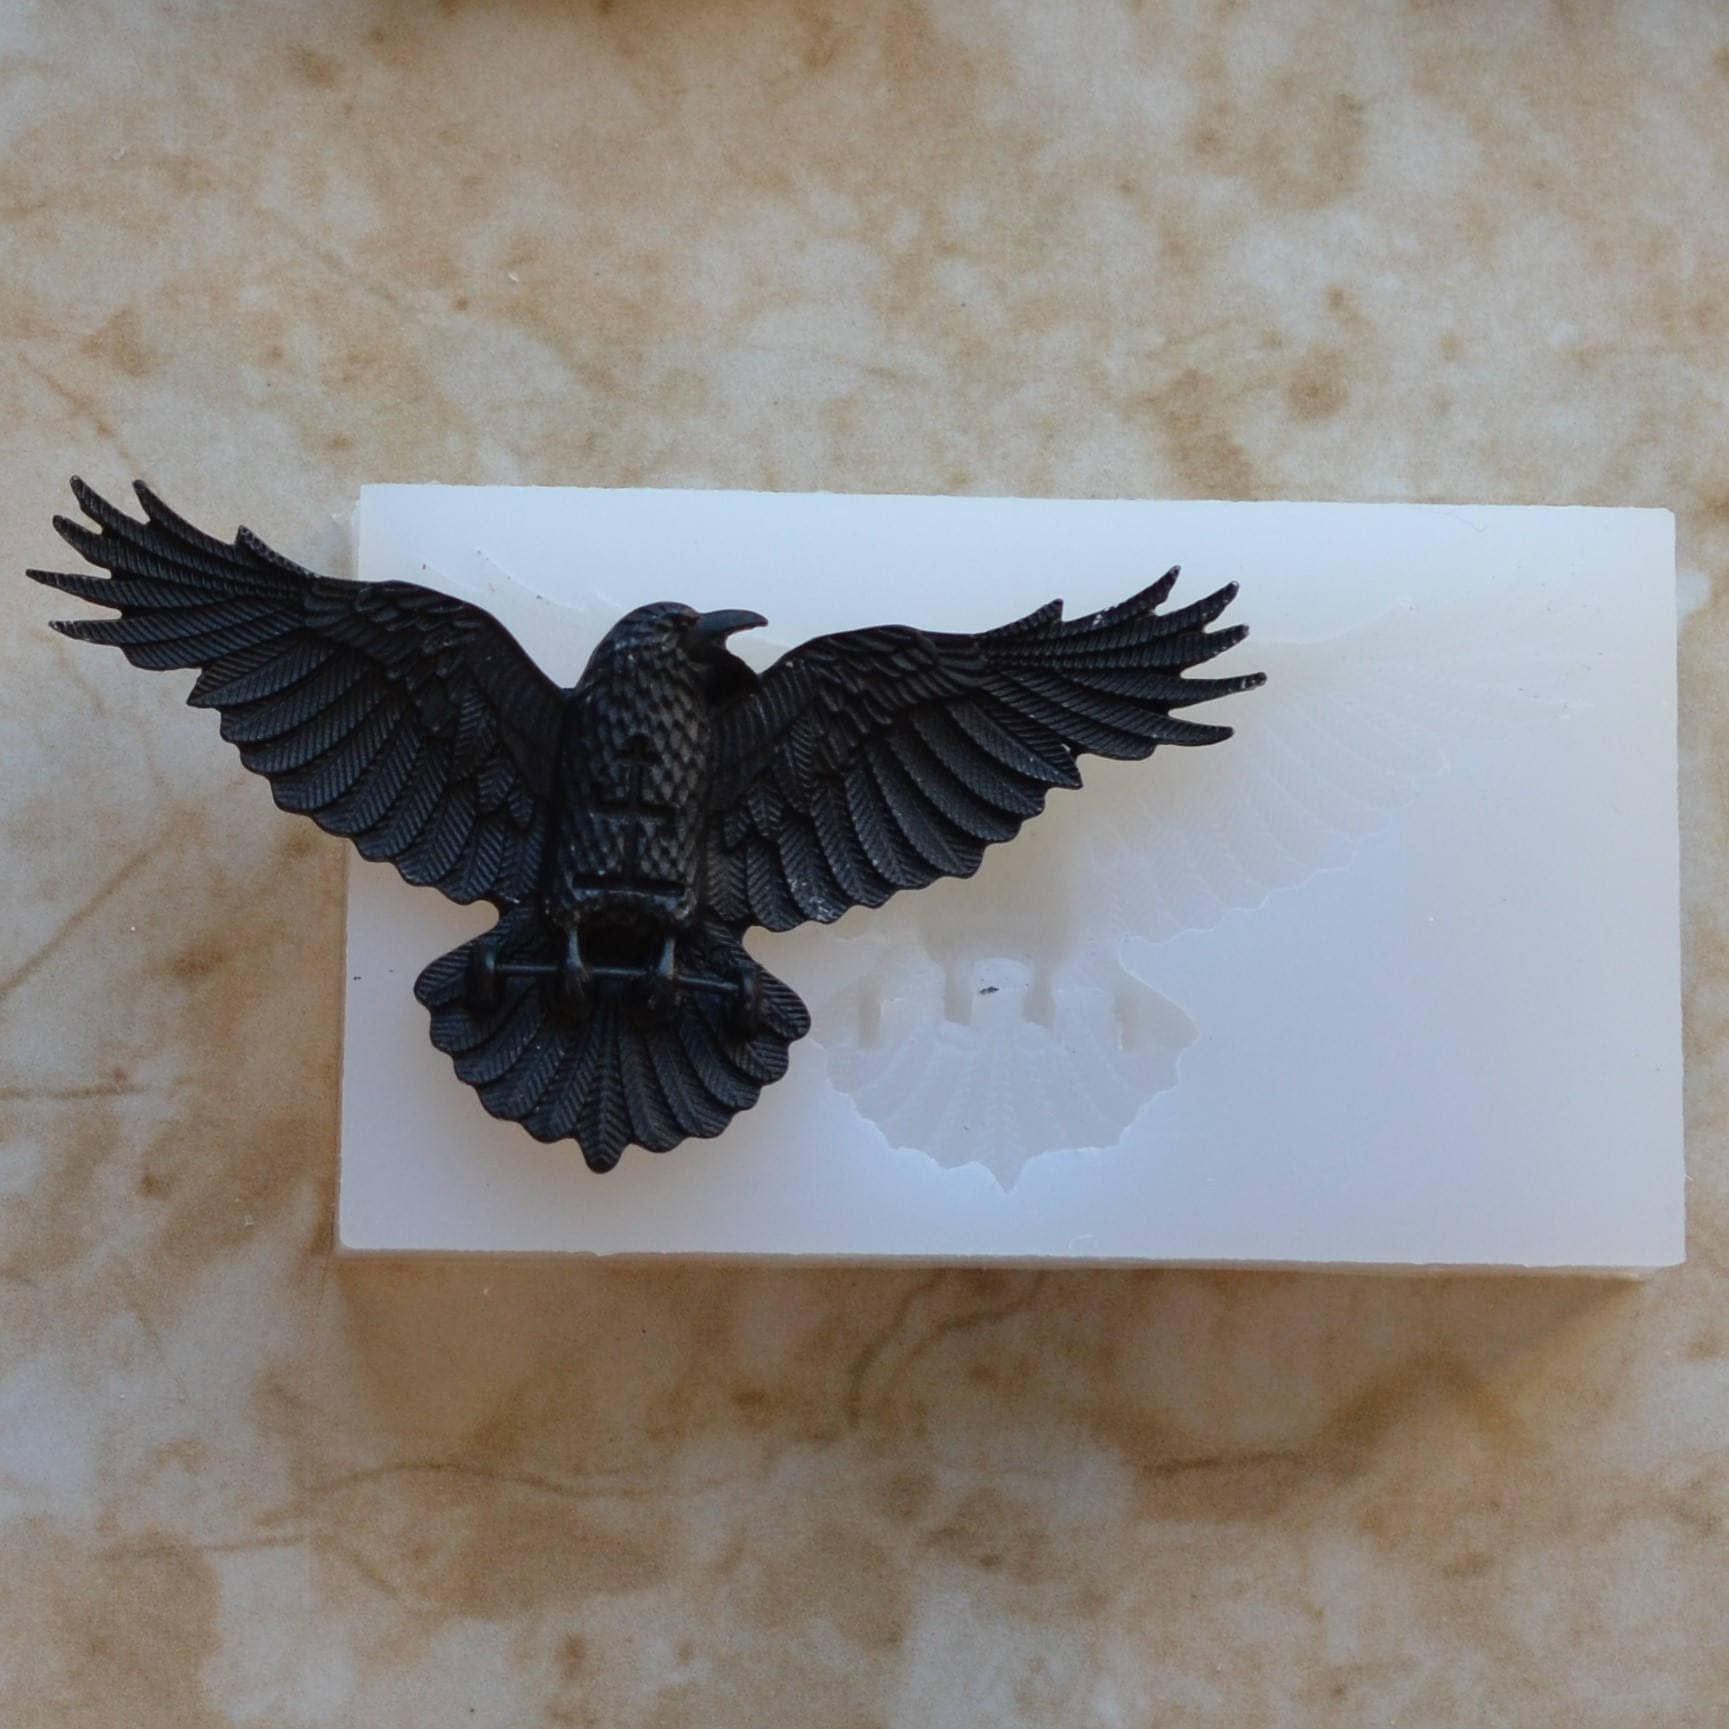 Bird Beads Mold for Jewelry and resin. Silicone Resin Mold. Resin Molds  Silicone.Food Grade - 6032